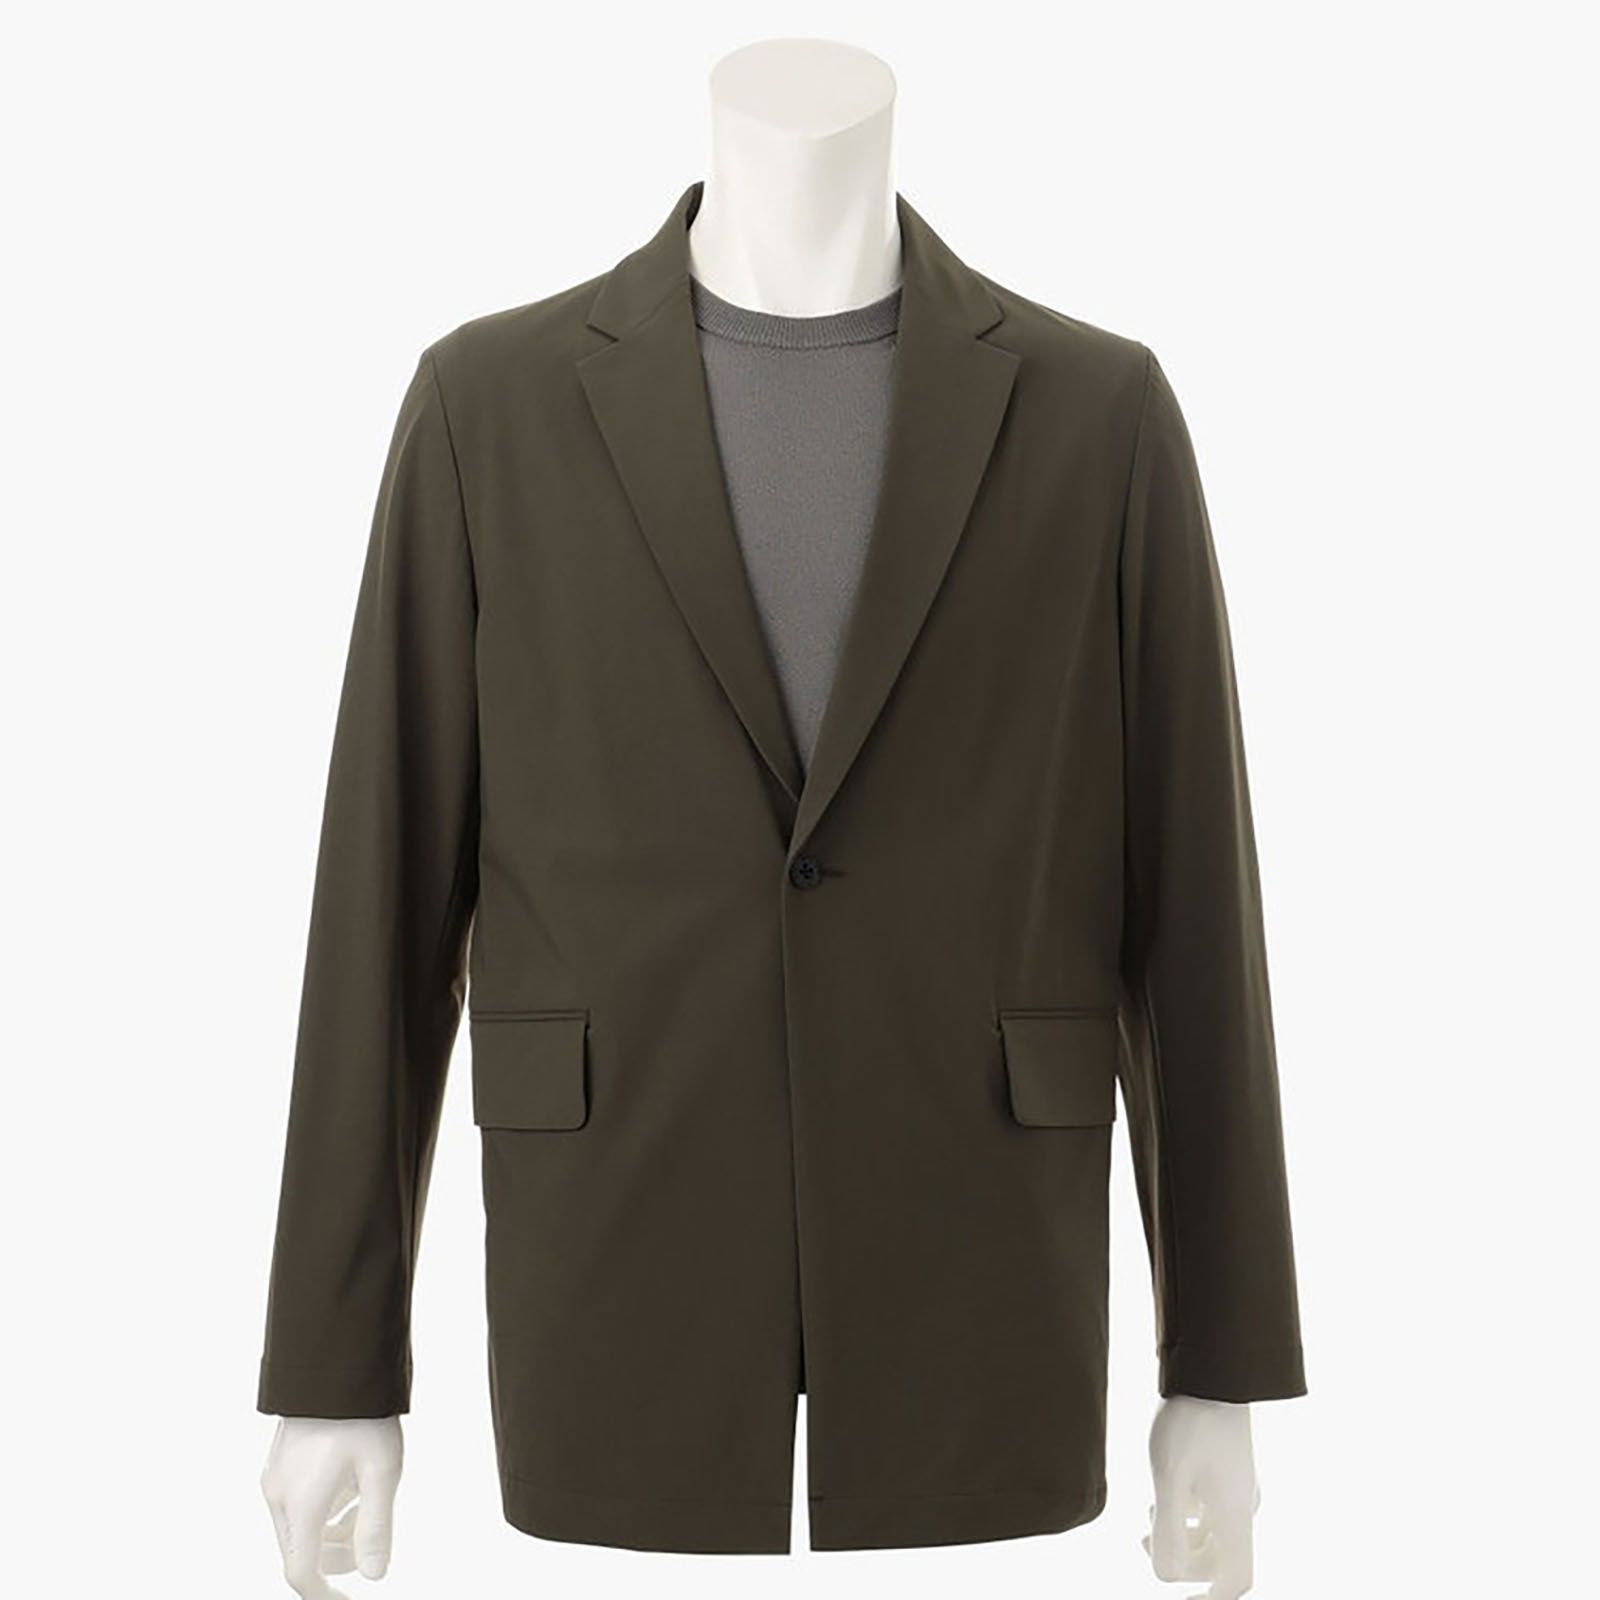 BRIEFING GOLF - MS CARVICO PACKABLE CARDIGAN JACKET